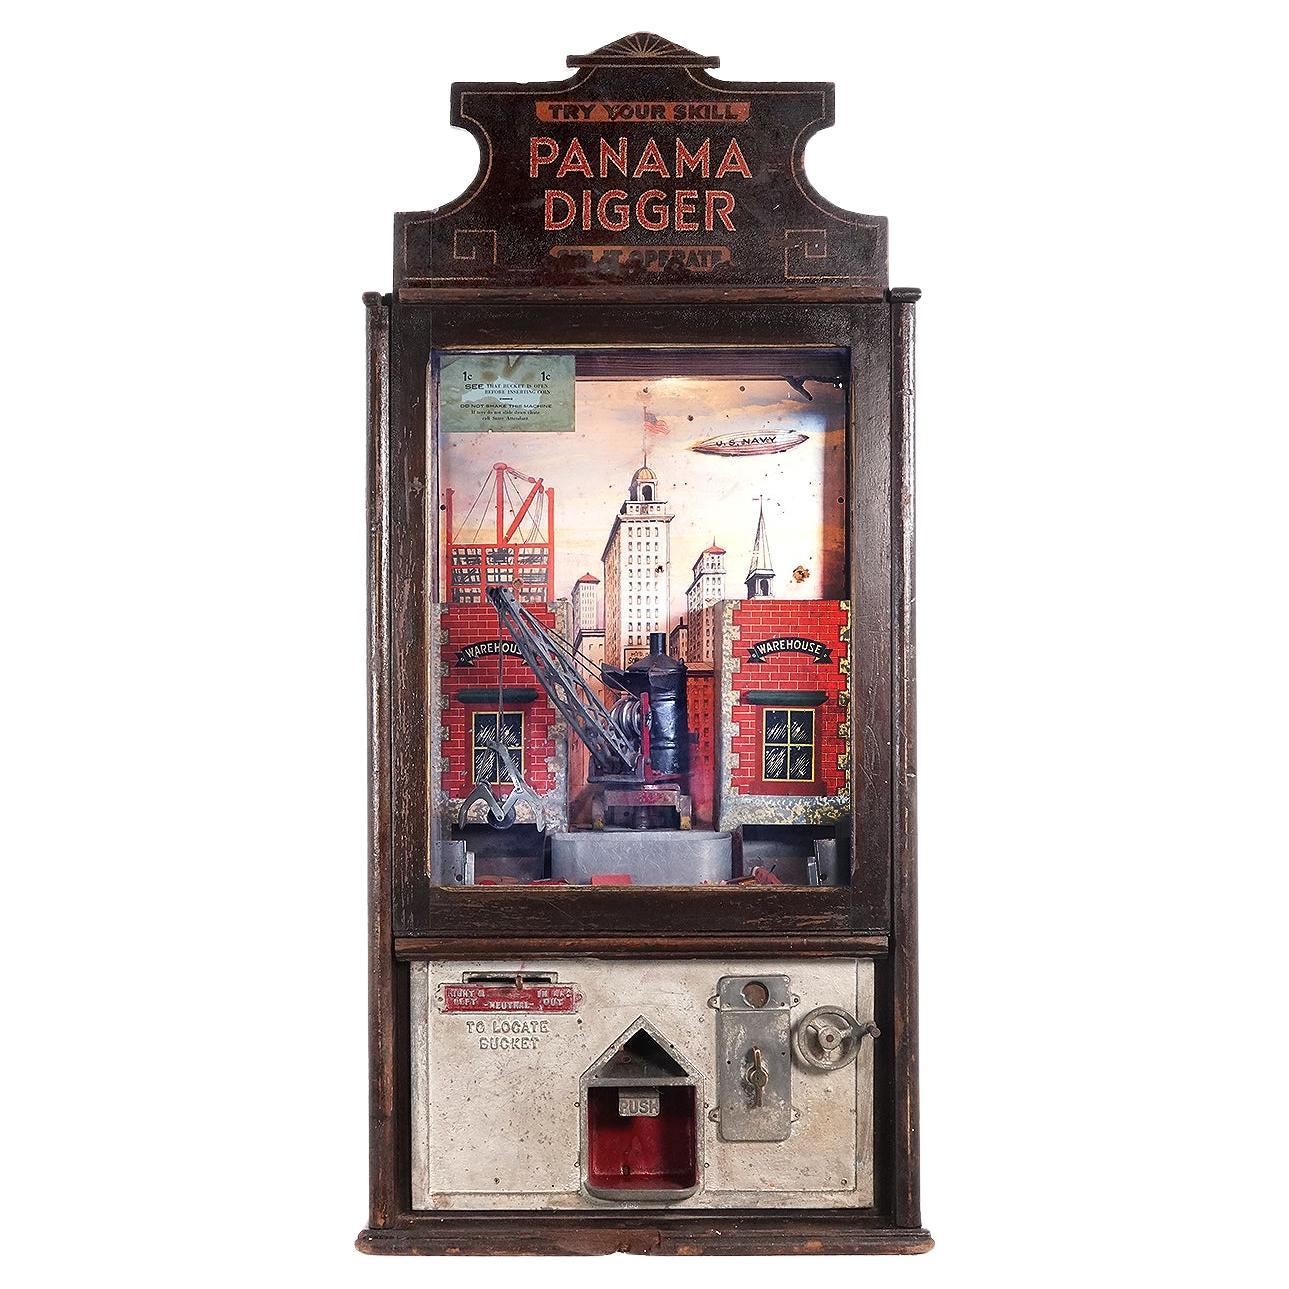 One Penney Coin Operated Panama Digger 1934